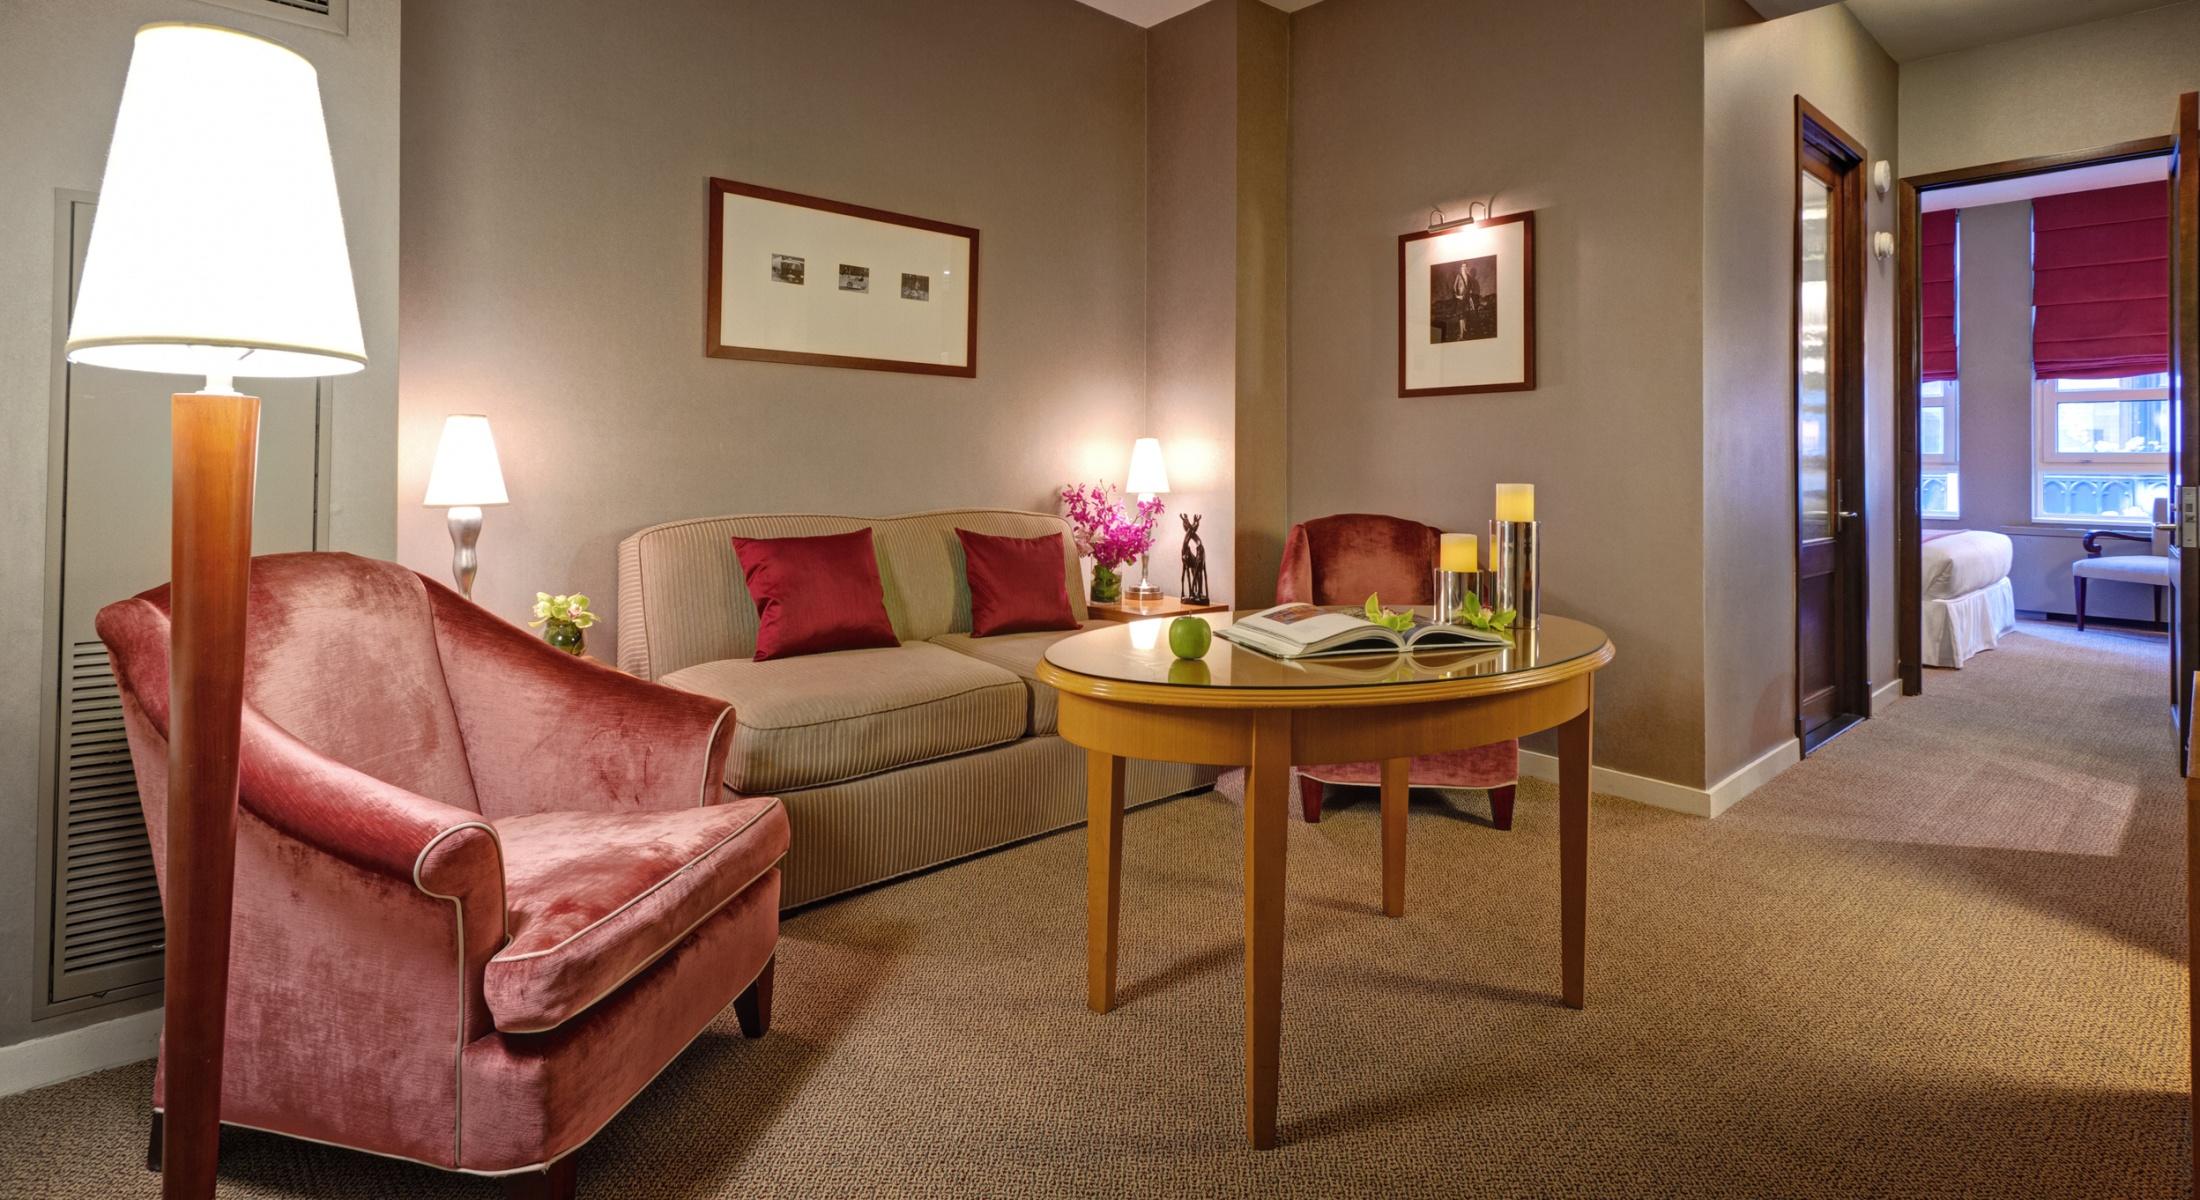 The living room in our Classic King Suite offers a tranquil space for you to relax during your visit to Hotel Giraffe